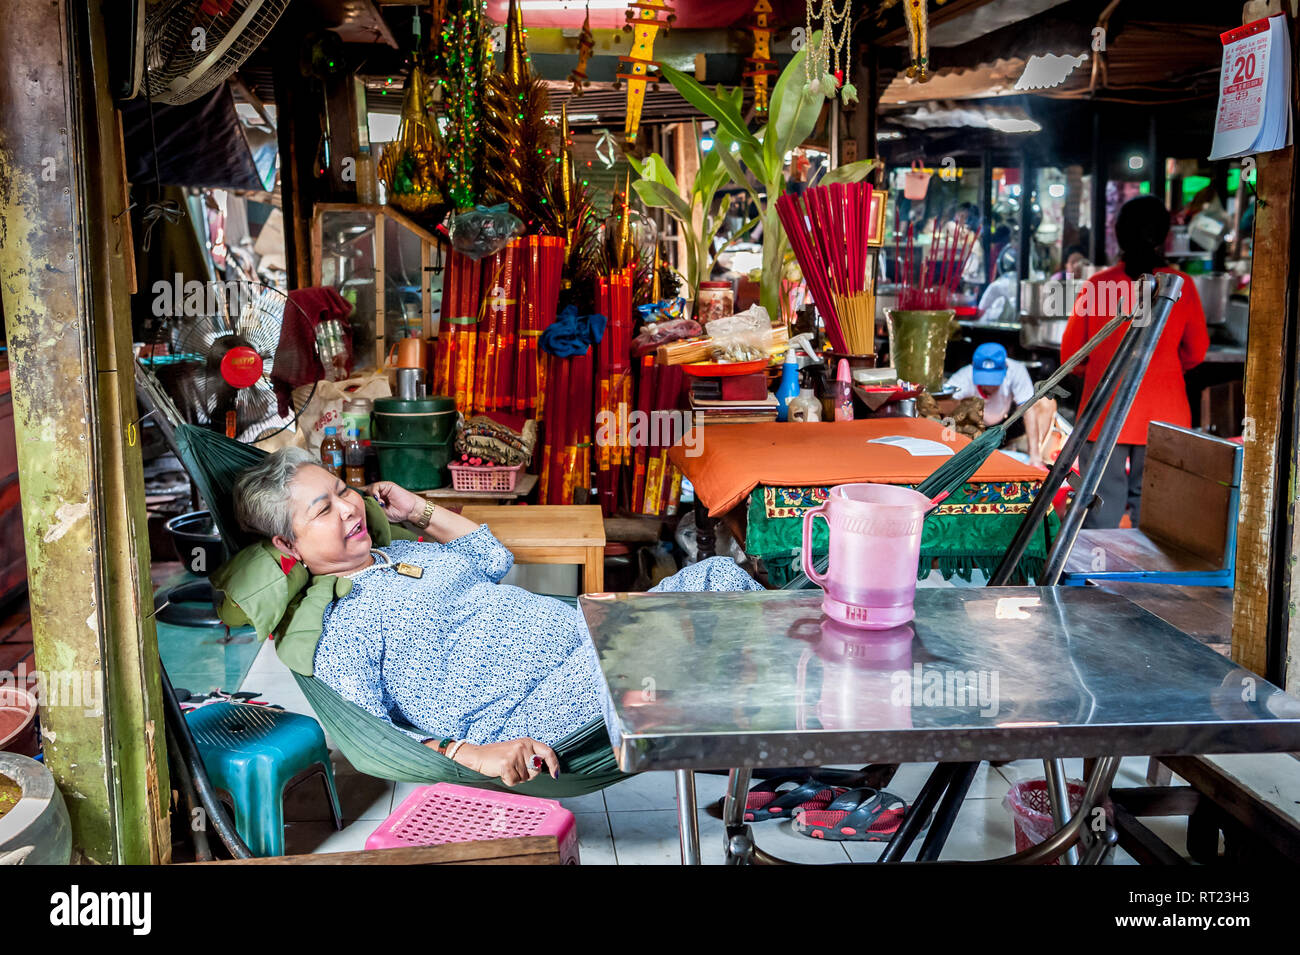 A Cambodian fortune teller relaxes at her stall waiting for a customer in a busy Phnom Penh indoor market. Phnom Penh Cambodia. Stock Photo